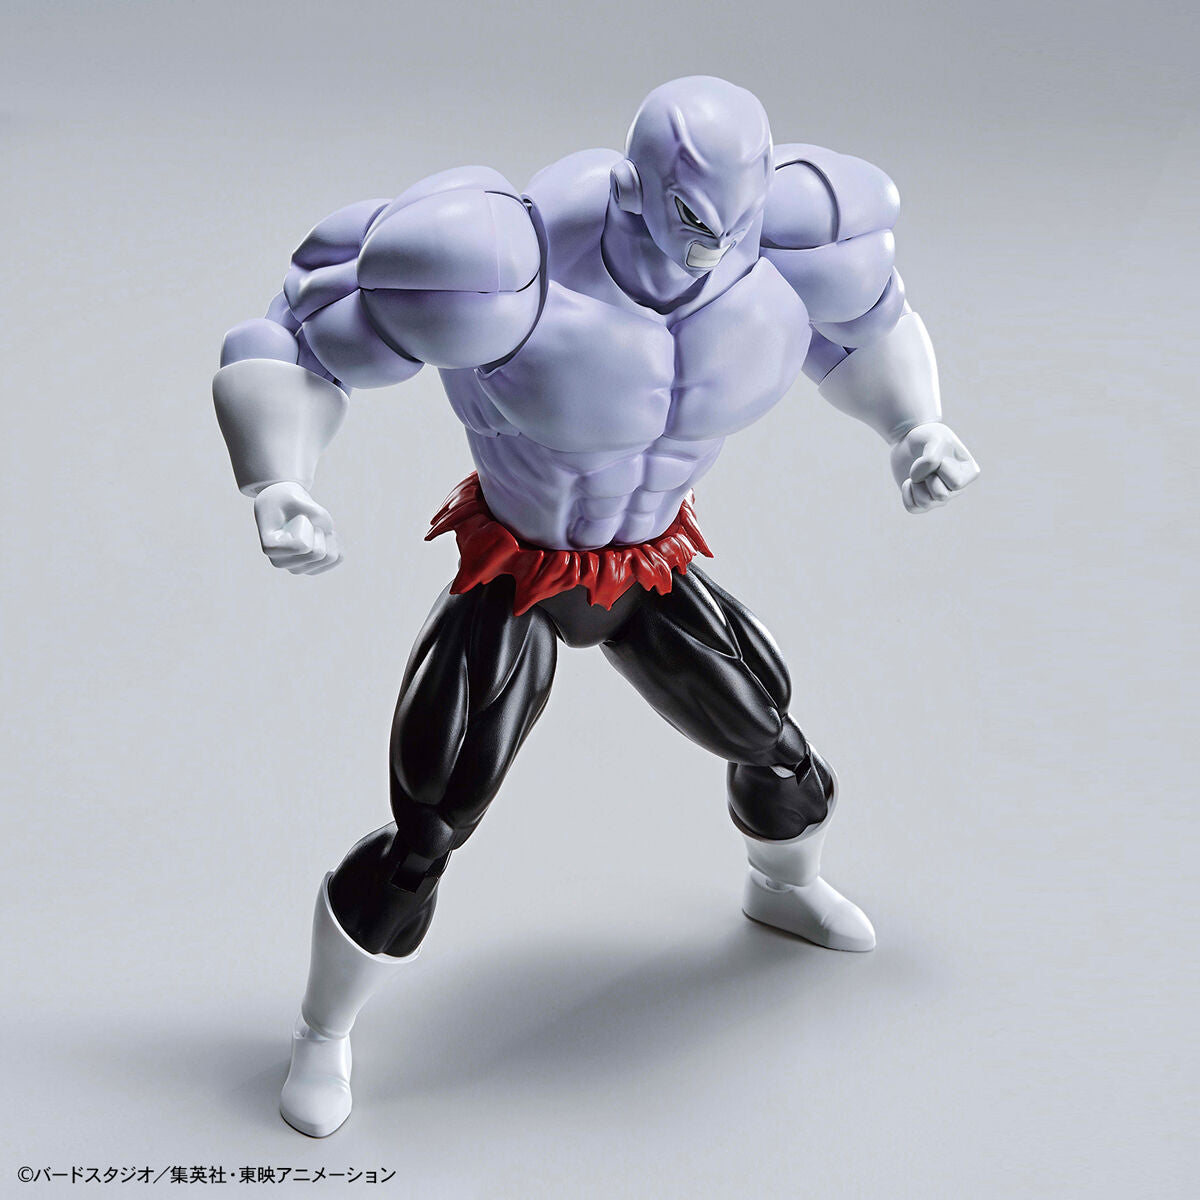 Dragon Ball - Jiren - Figure-rise Standard Model Kit, Strongest warrior of Universe 11 with Muscle Build System, Nippon Figures